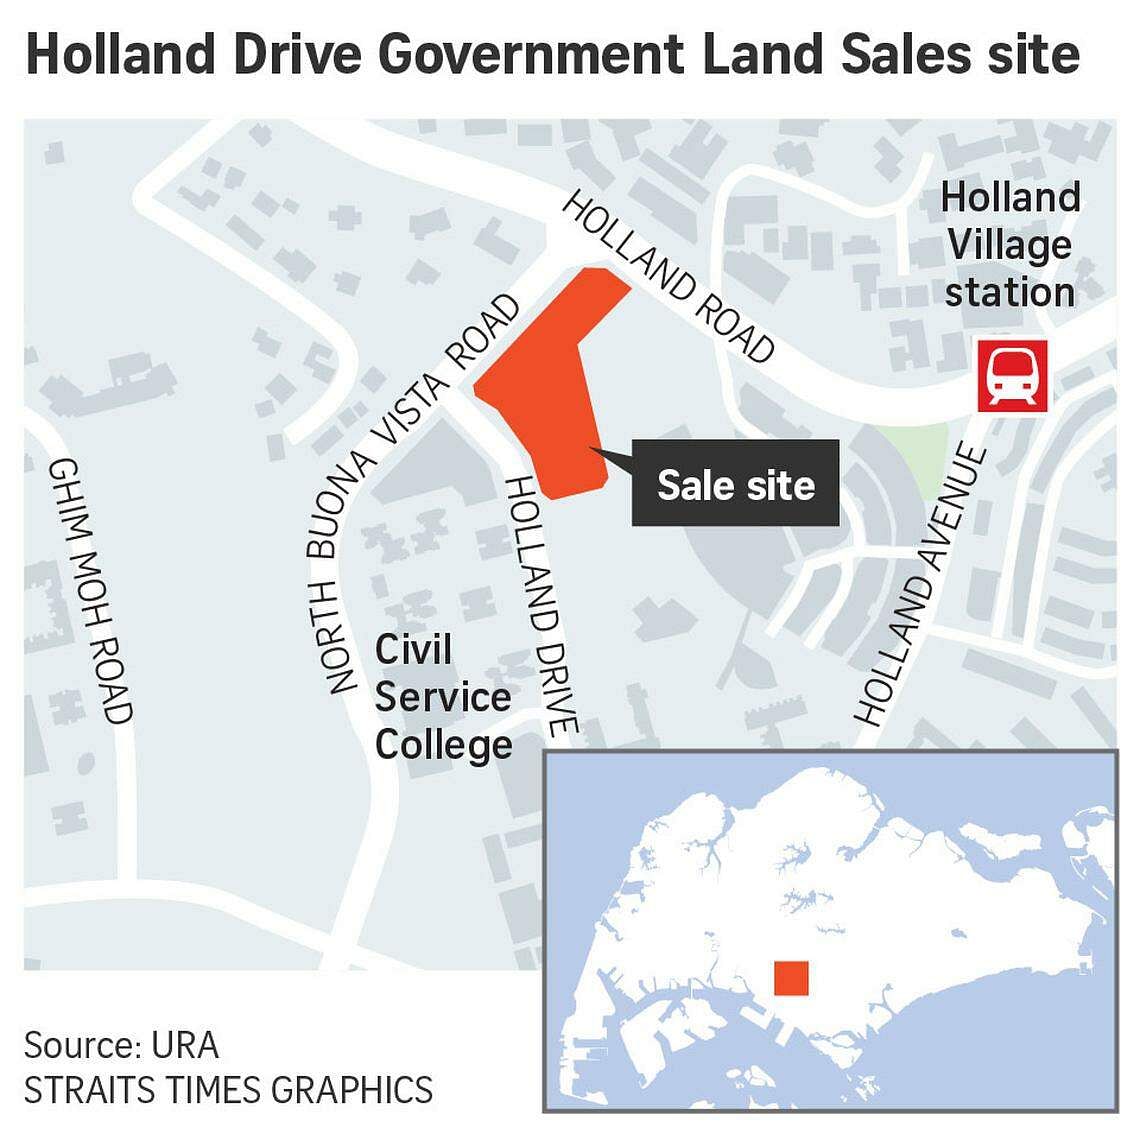 consortium led by uol and capitaland casts top bid of $805.4m for holland drive gls site